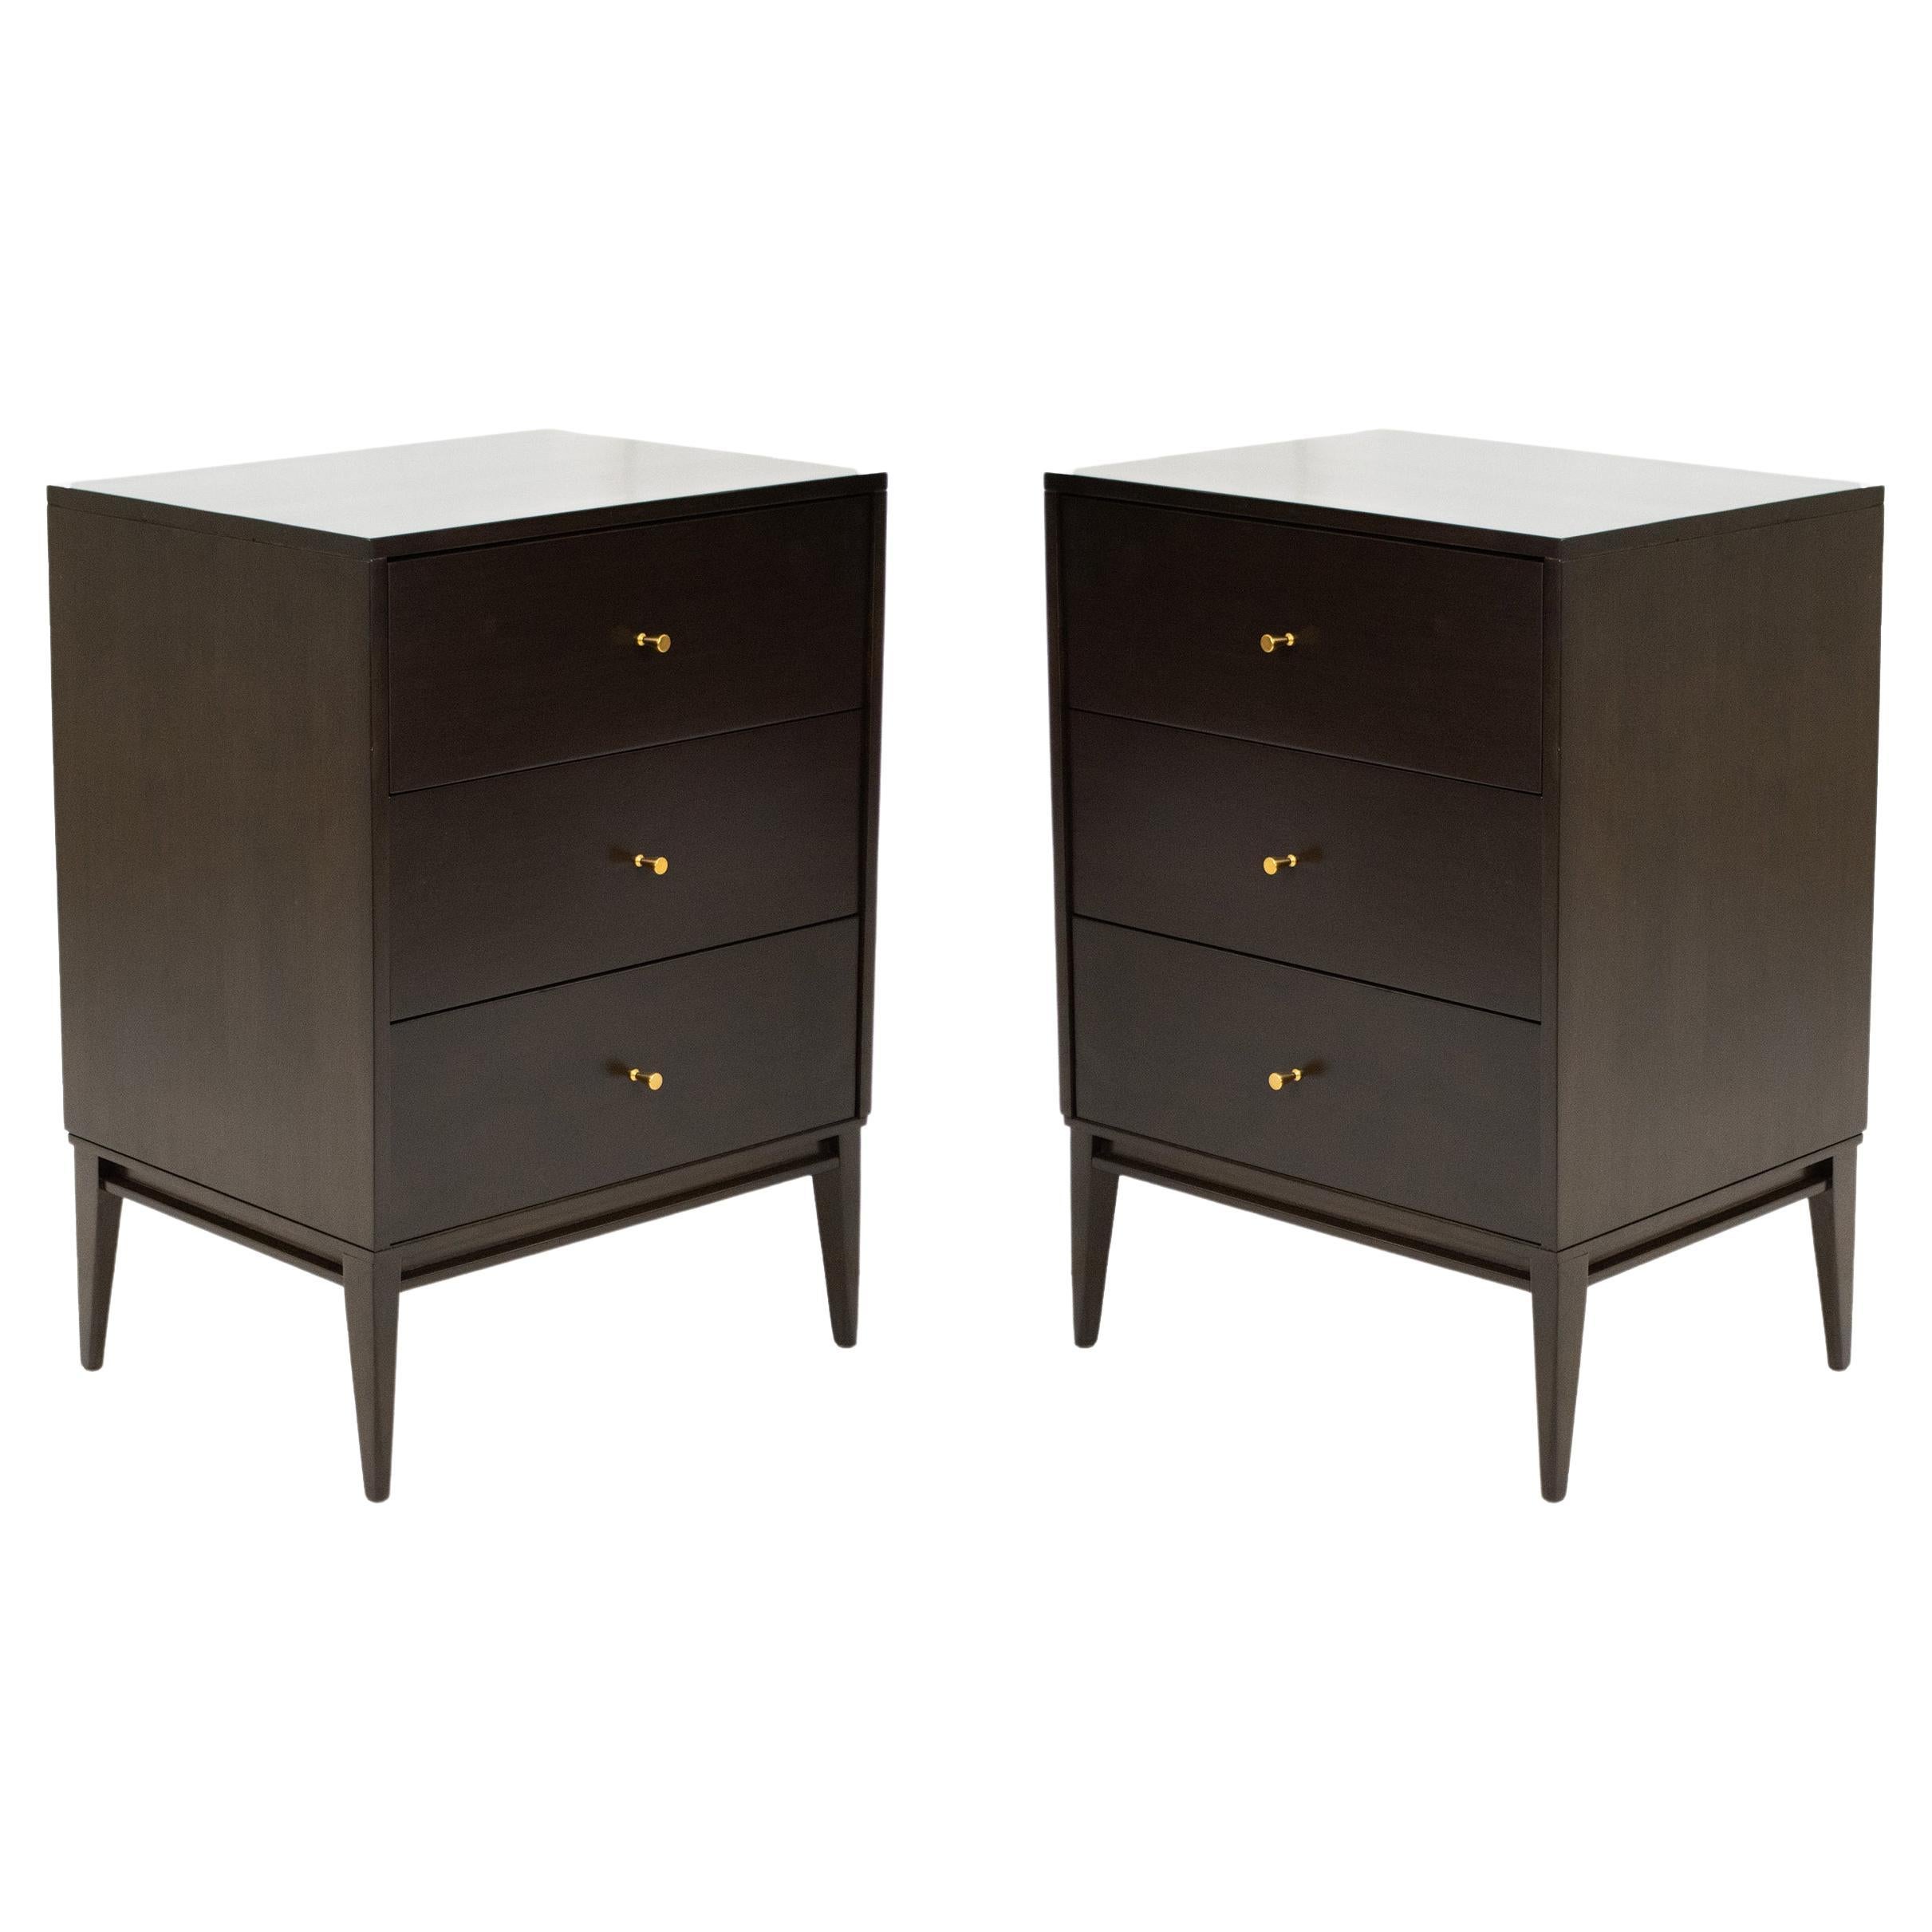 Pair of Paul McCobb Planner Group Three-Drawer Tall Night Stands im Angebot